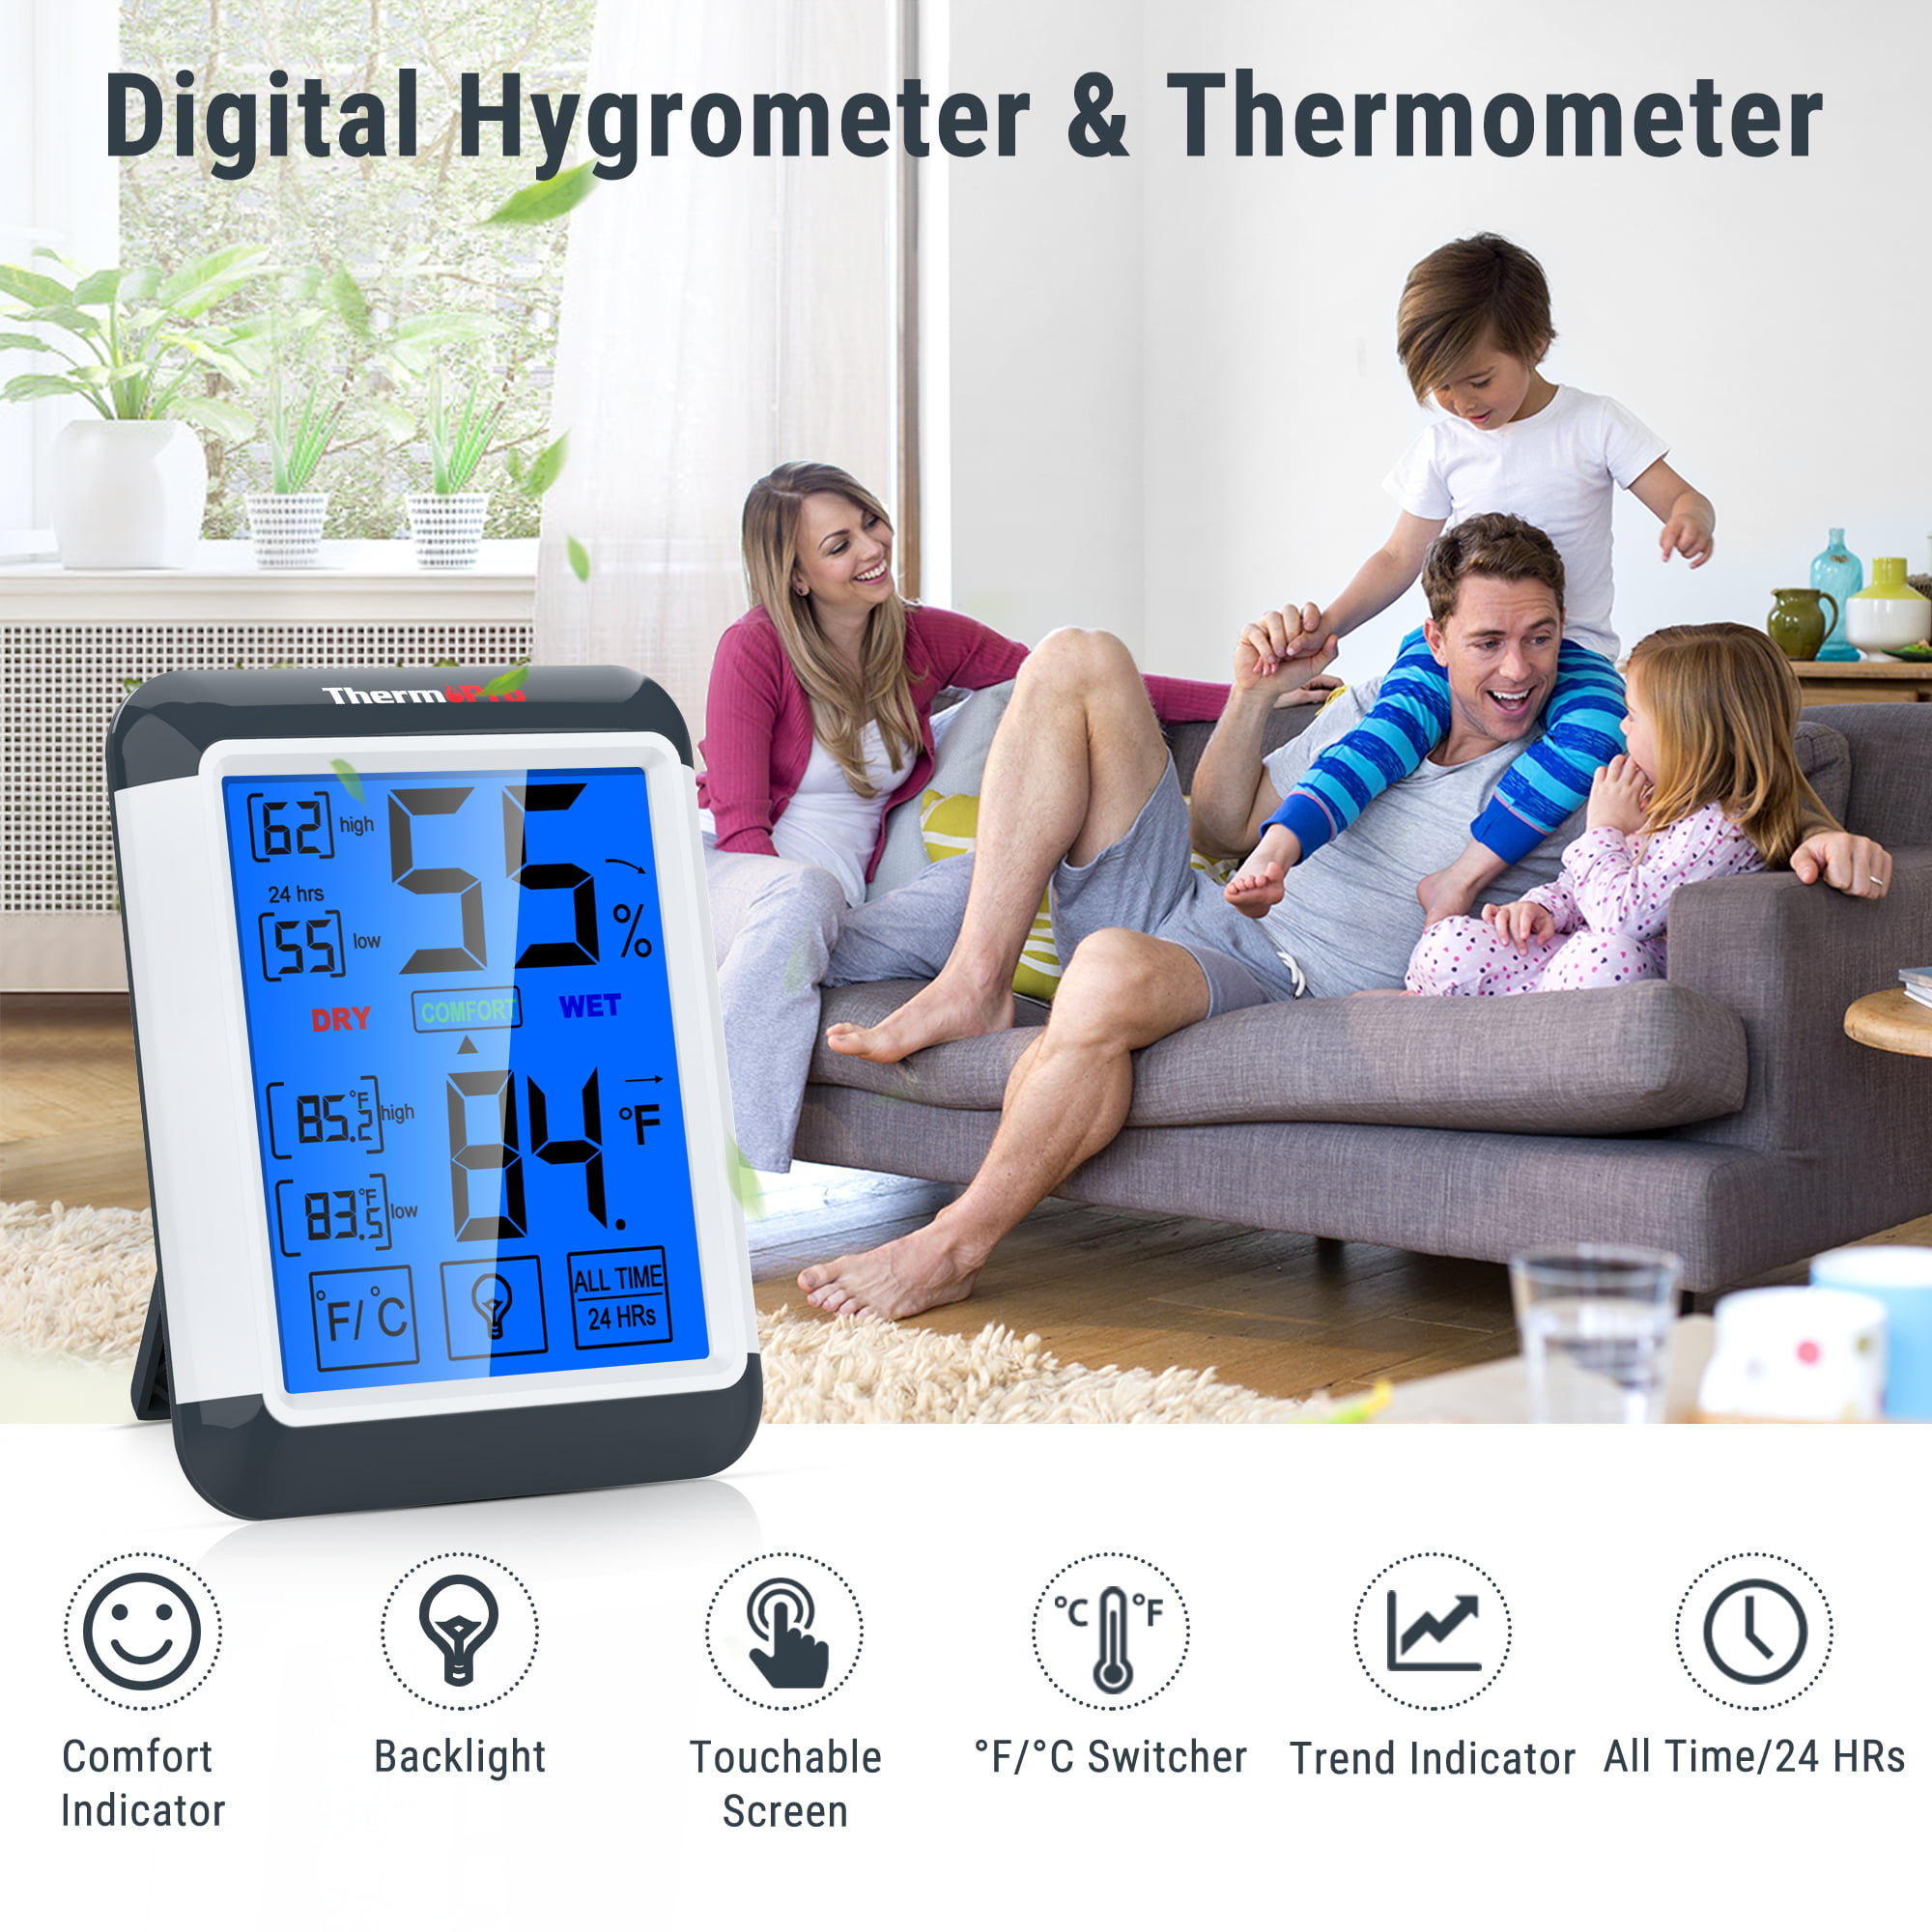 ThermoPro TP55 Digital Hygrometer Thermometer with Jumbo